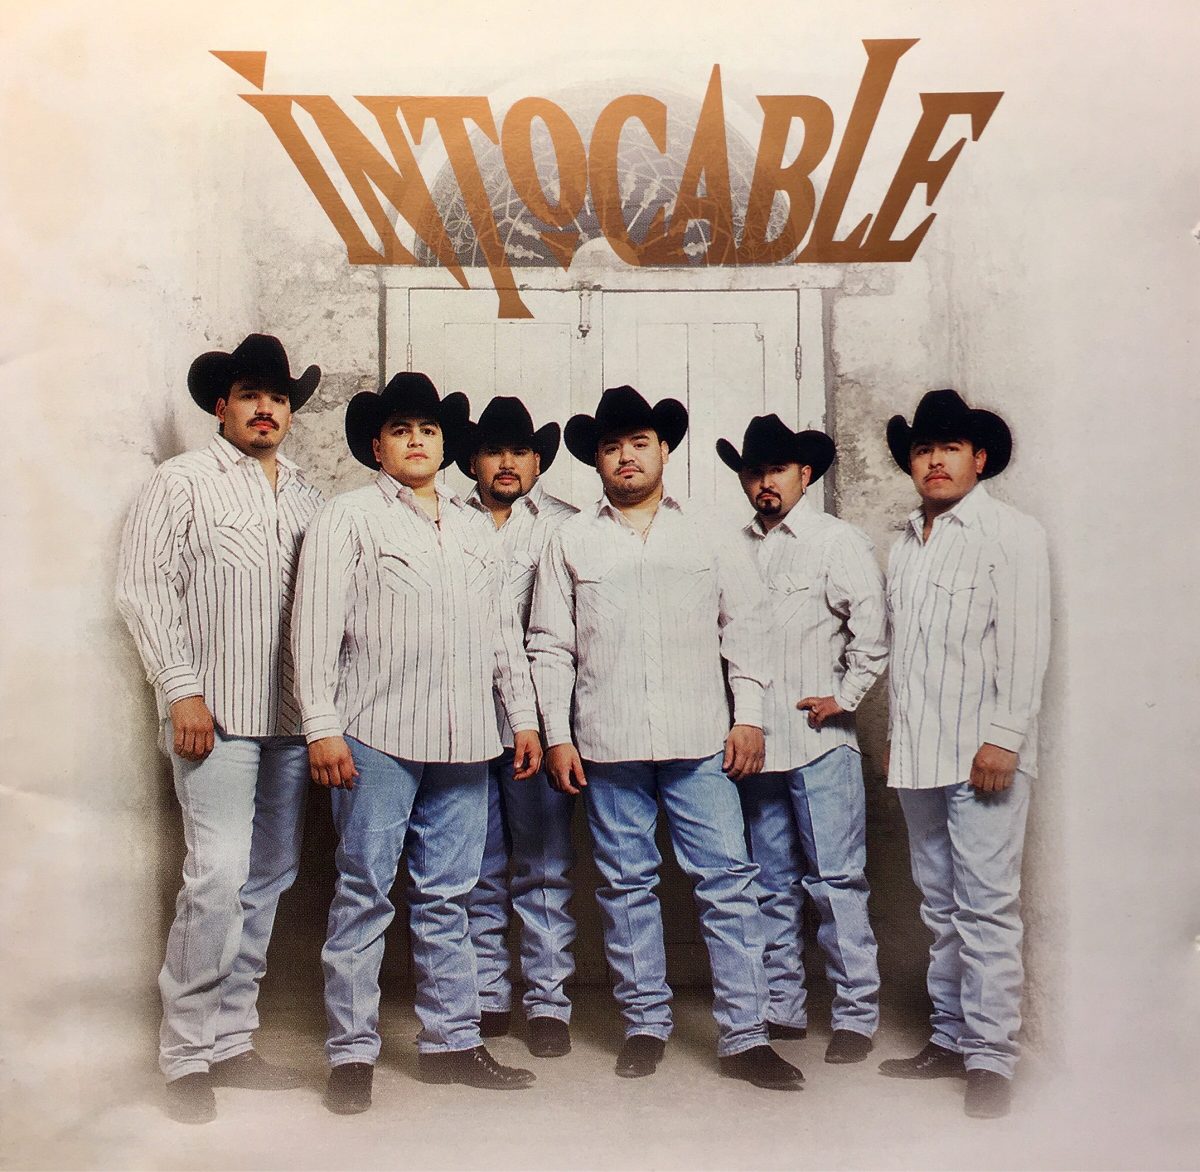 Intocable World Fan Club Es Tan Bello on Twitter: 